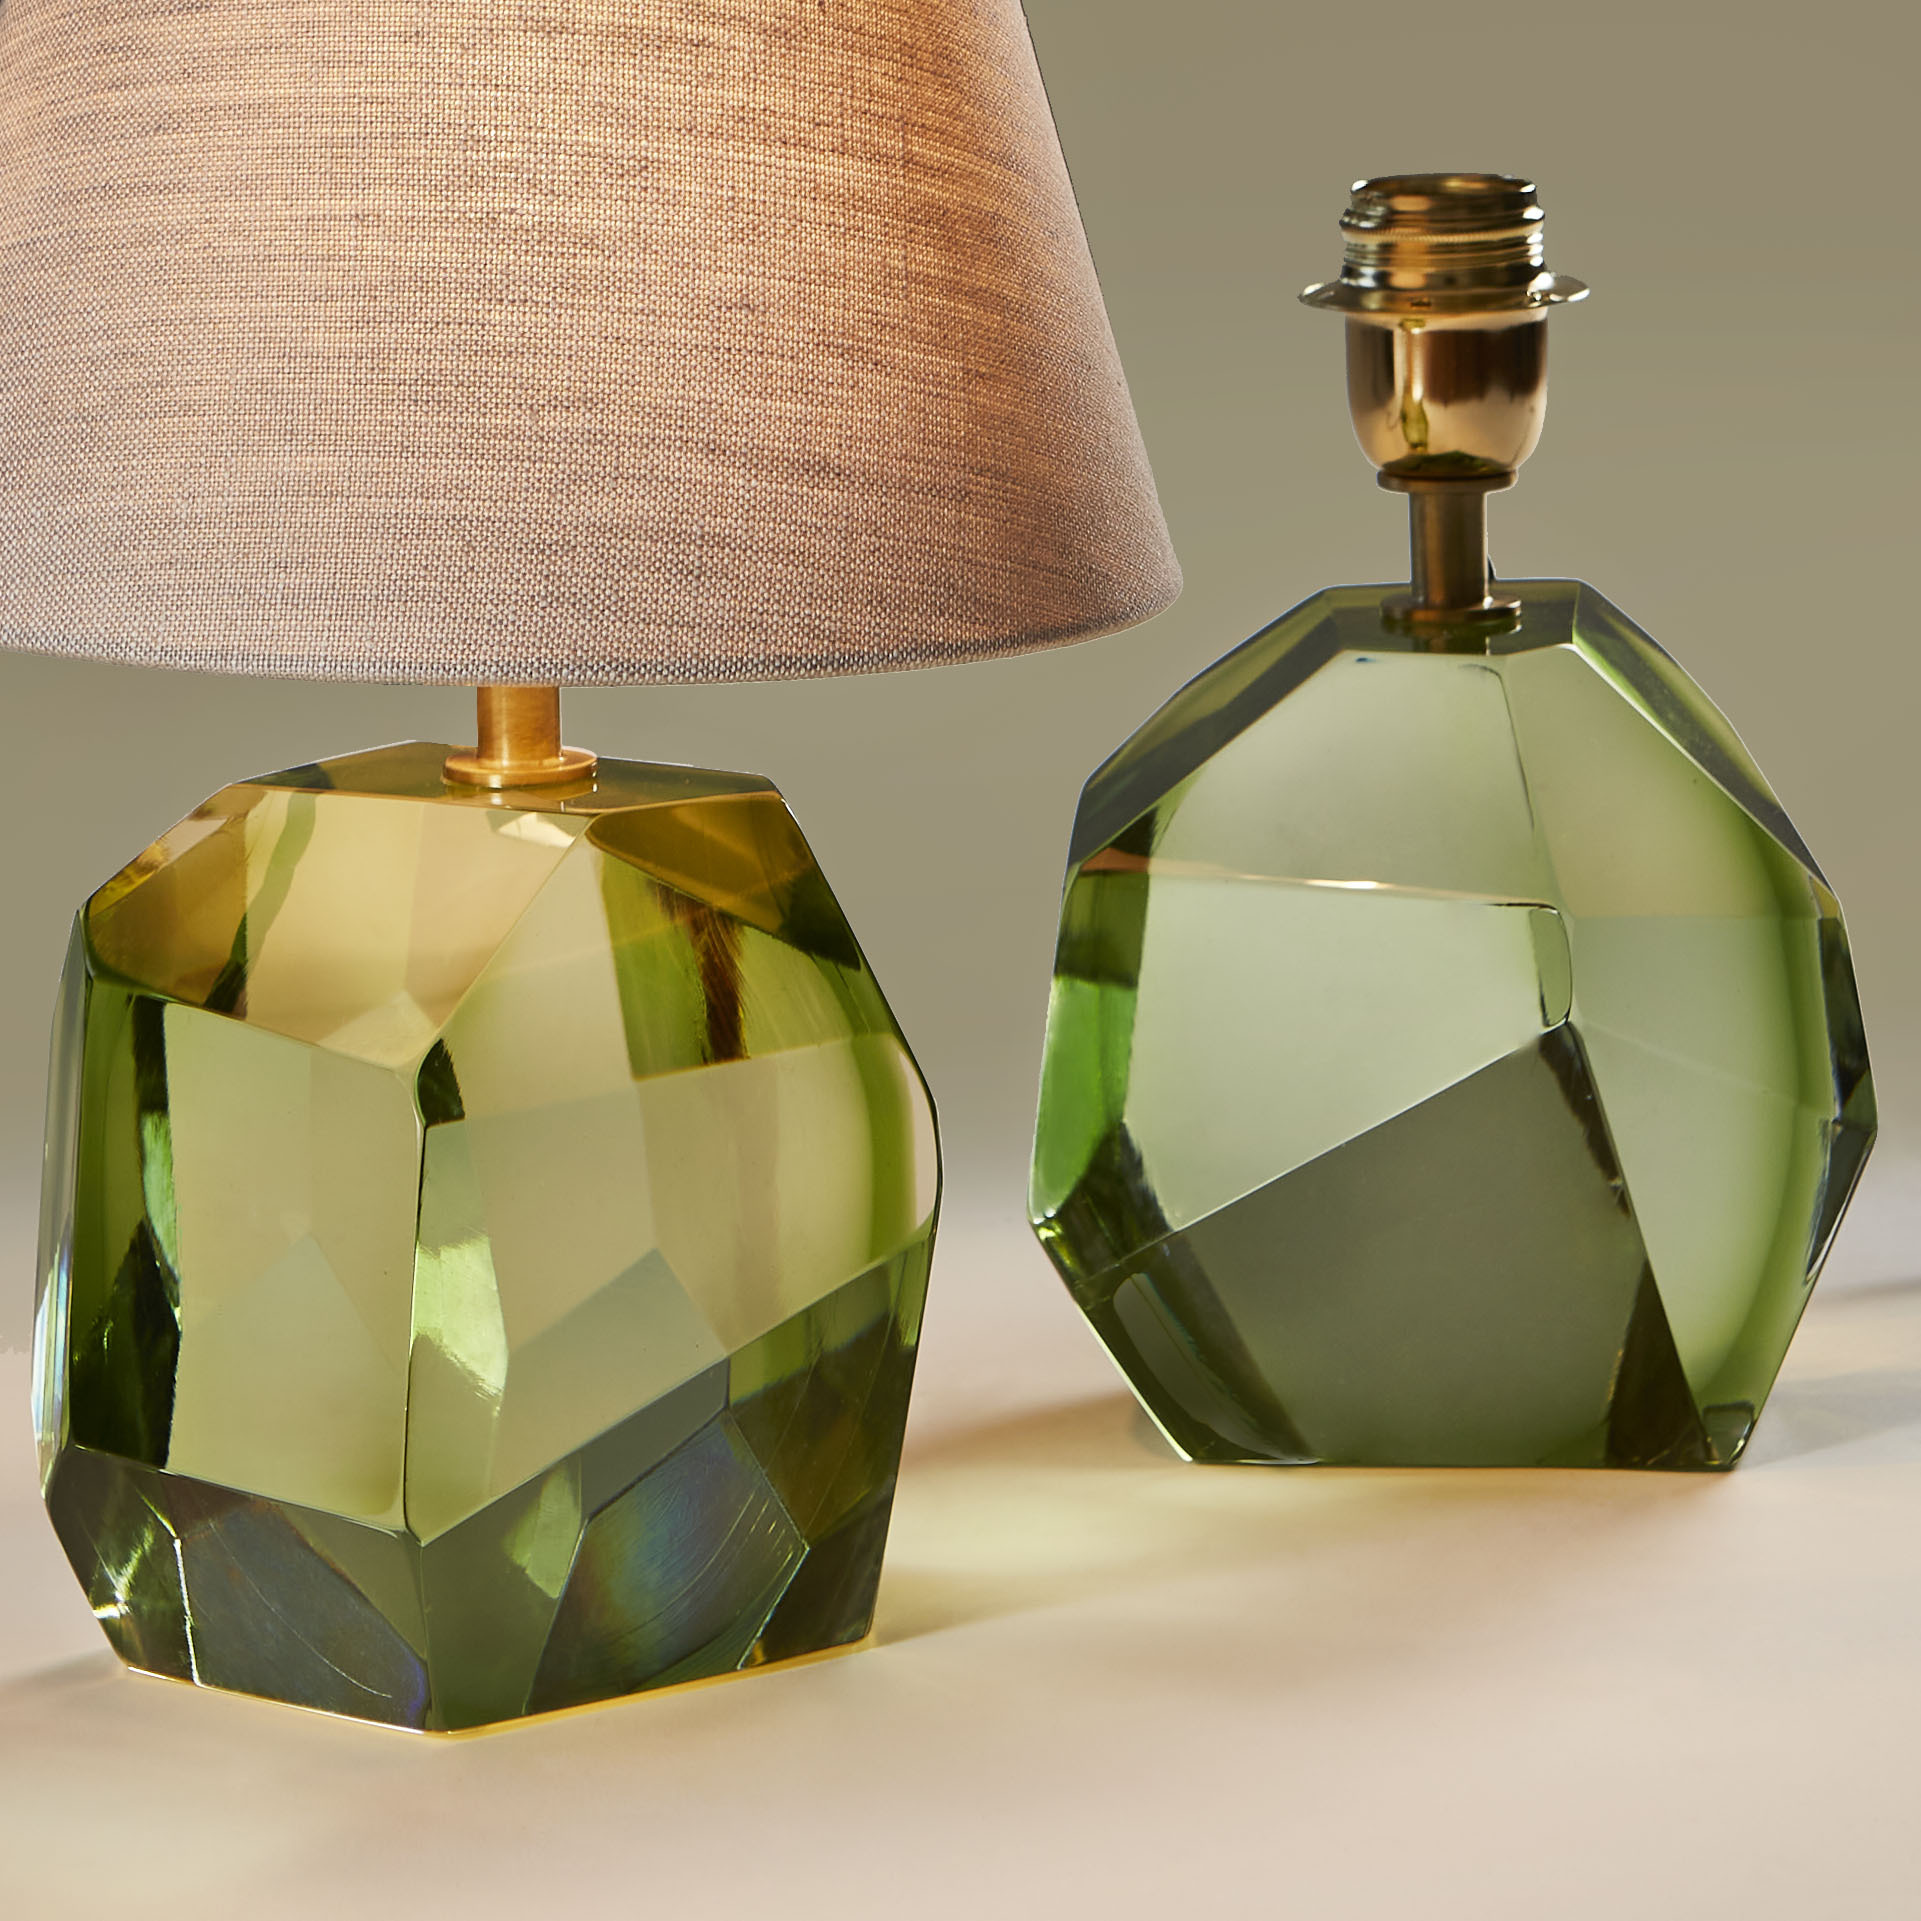 The image for Pair Of Pale Green Rock Lamps 109 V1